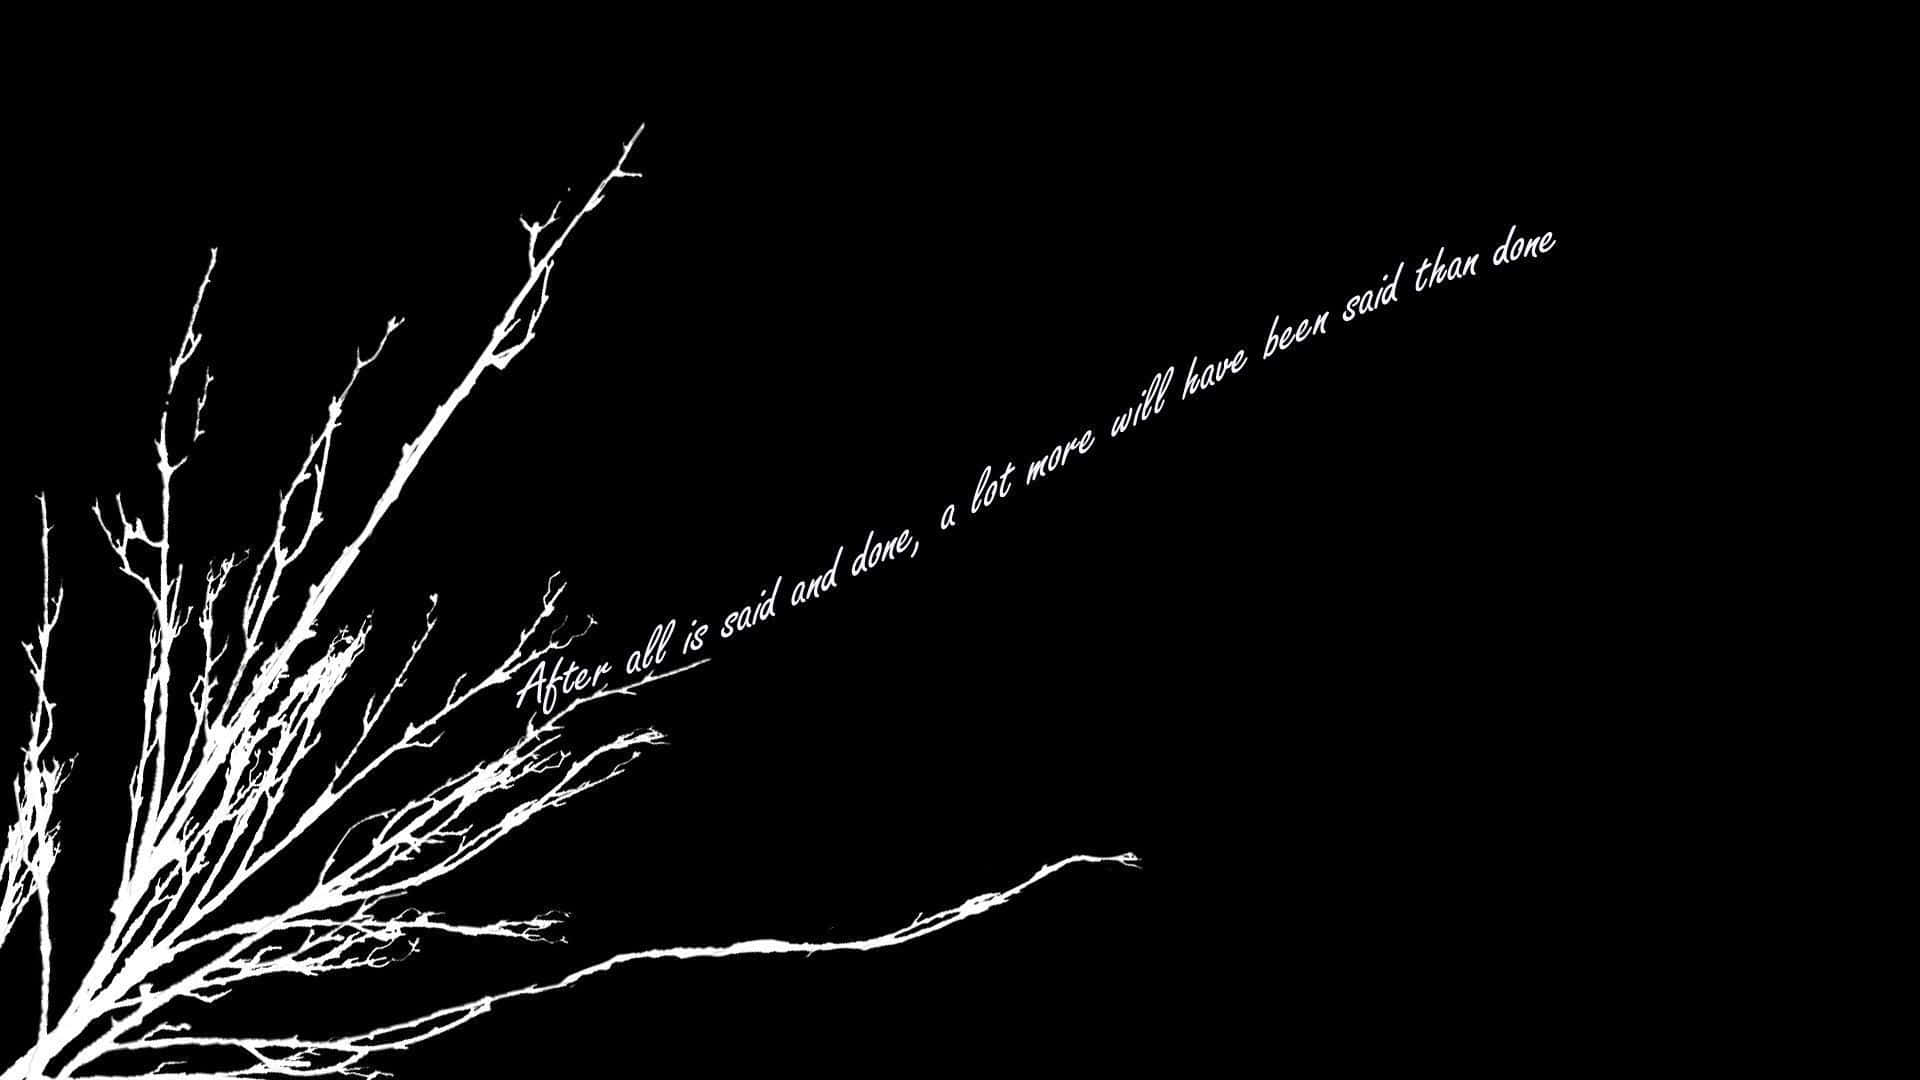 A Black And White Image Of A Tree With A Quote Wallpaper